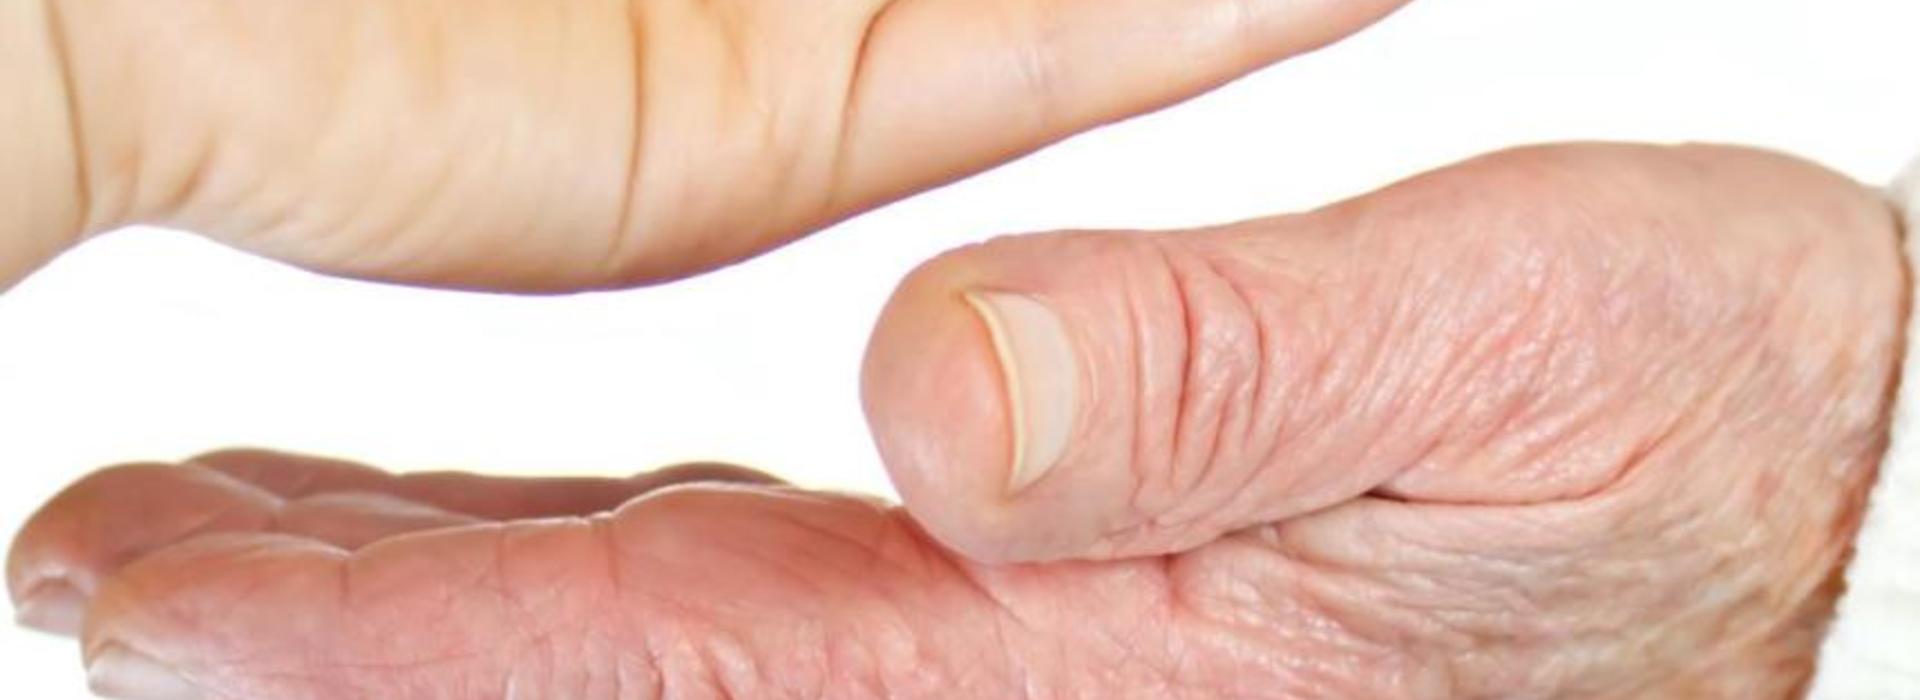 Hand dropping pills into an elderly person's hand